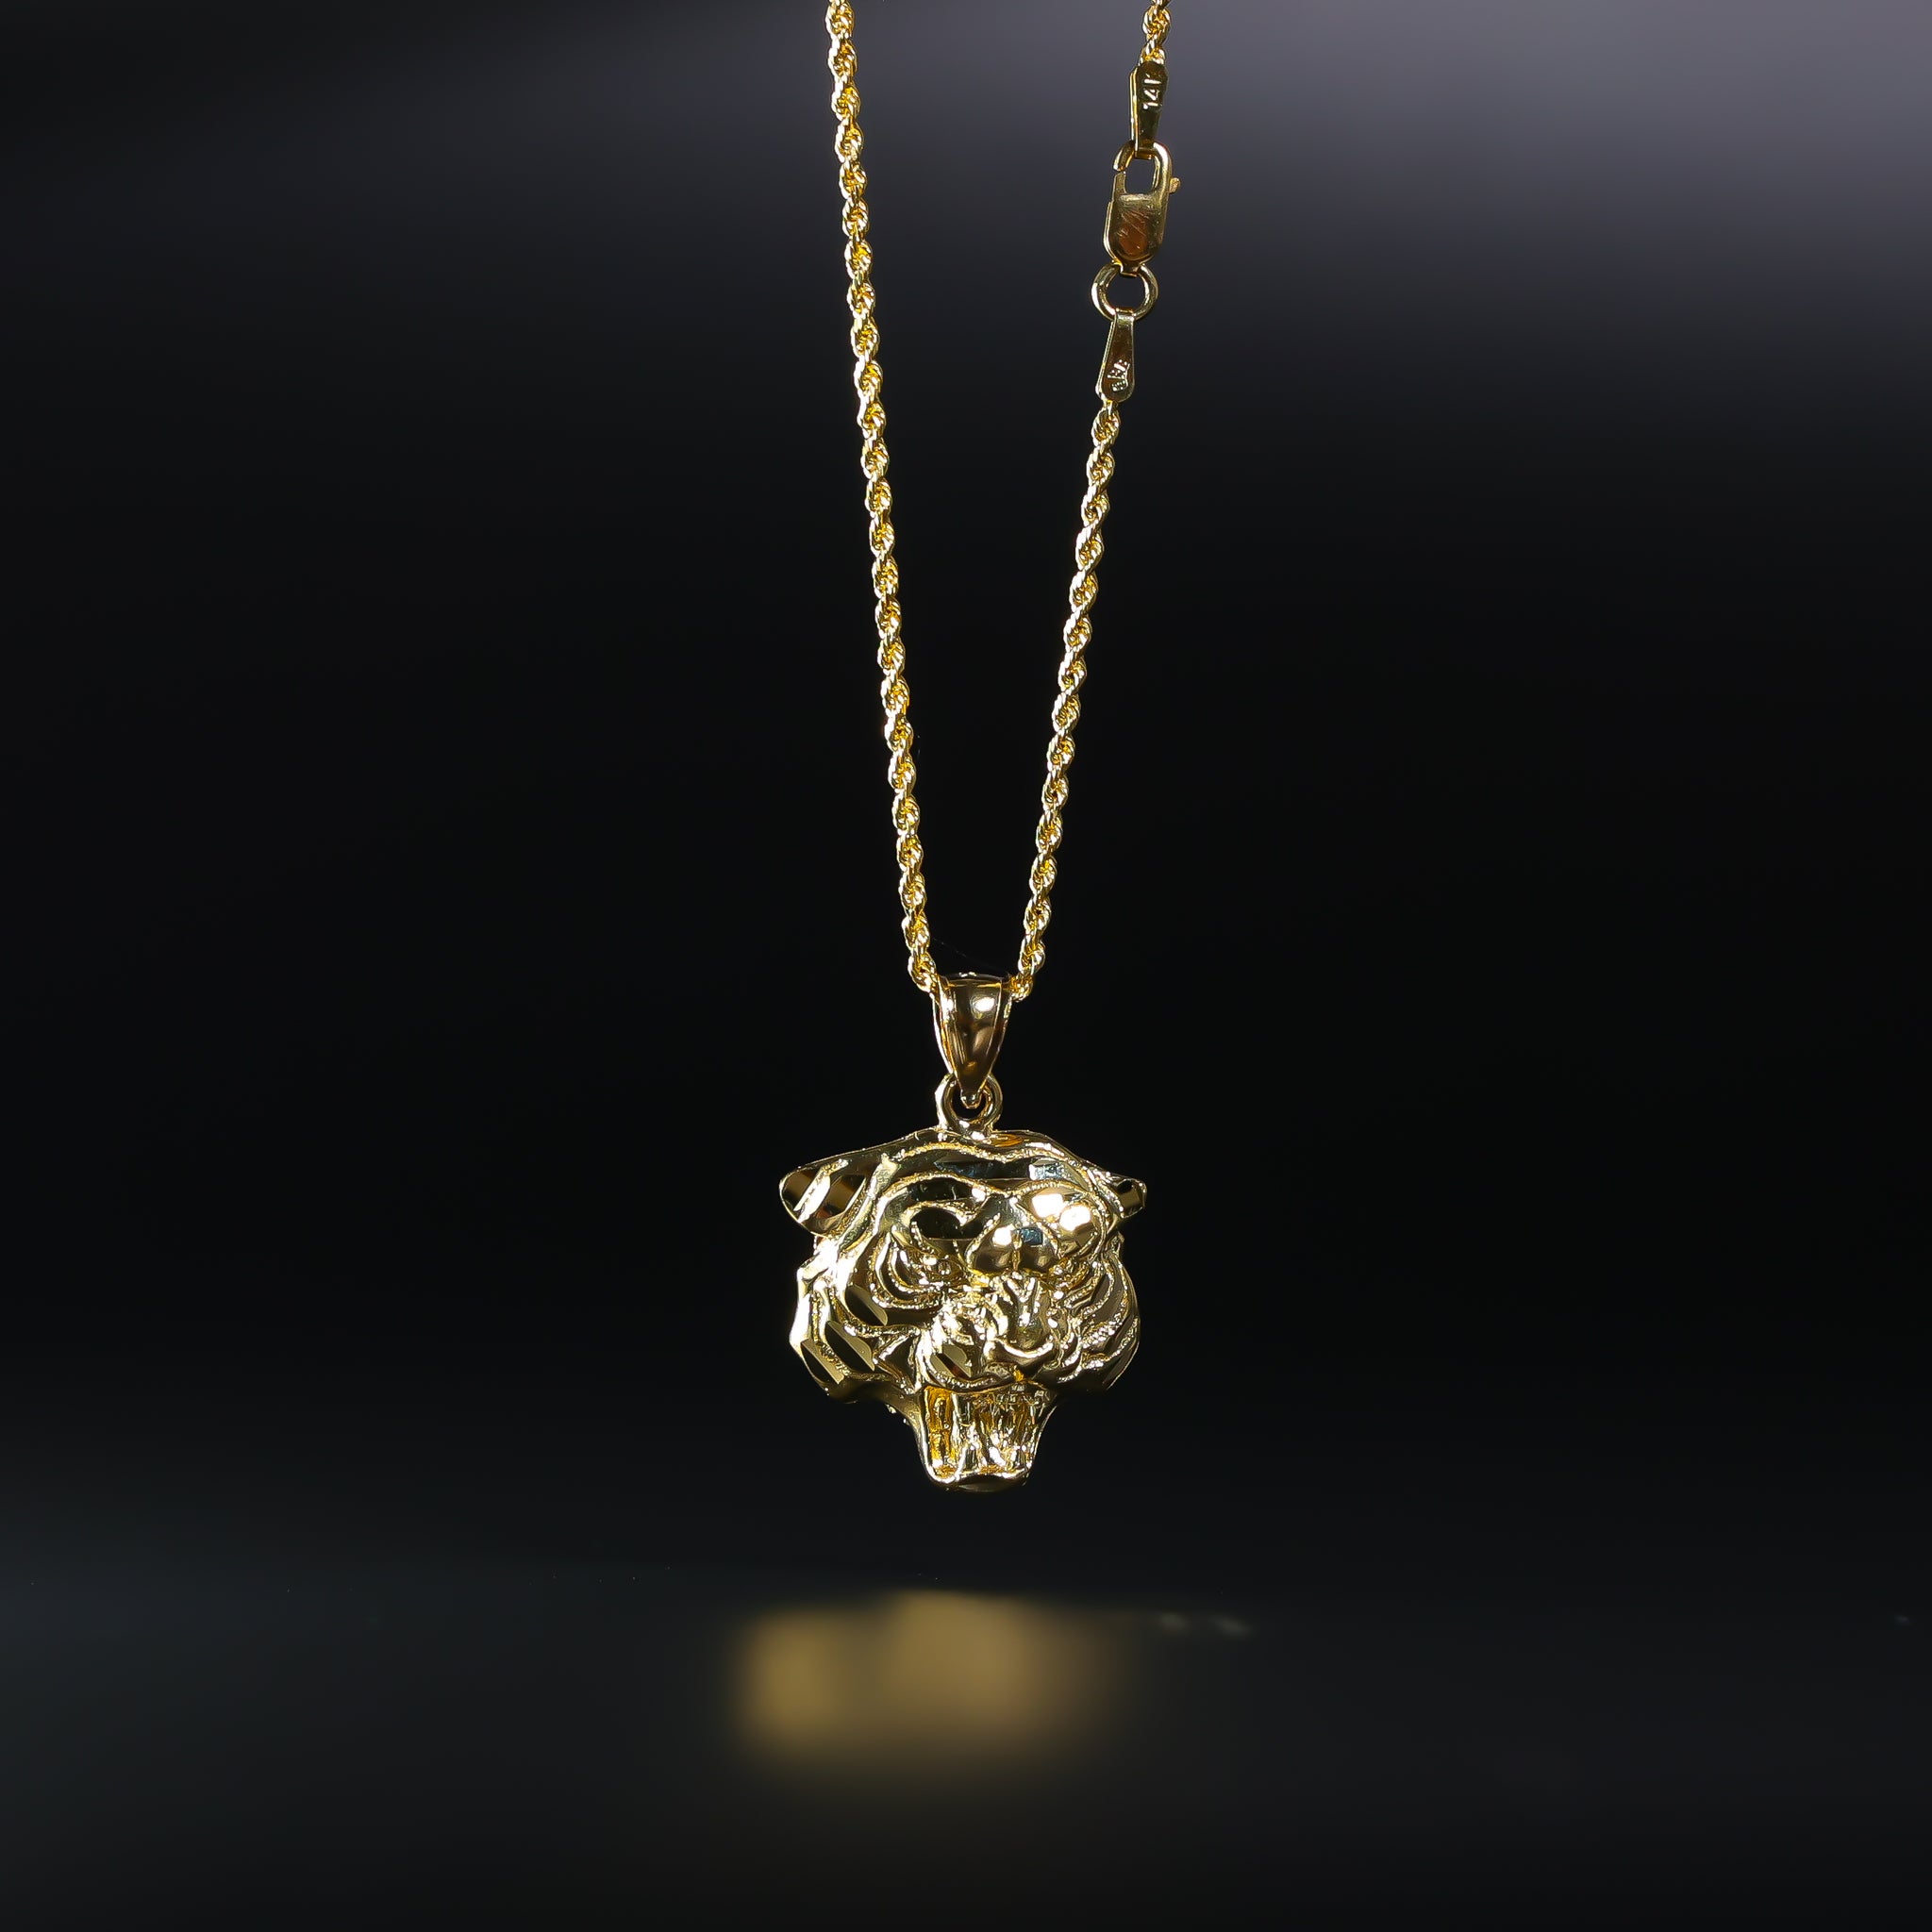 Gold Tiger Pendant Model-1617 - Charlie & Co. Jewelry